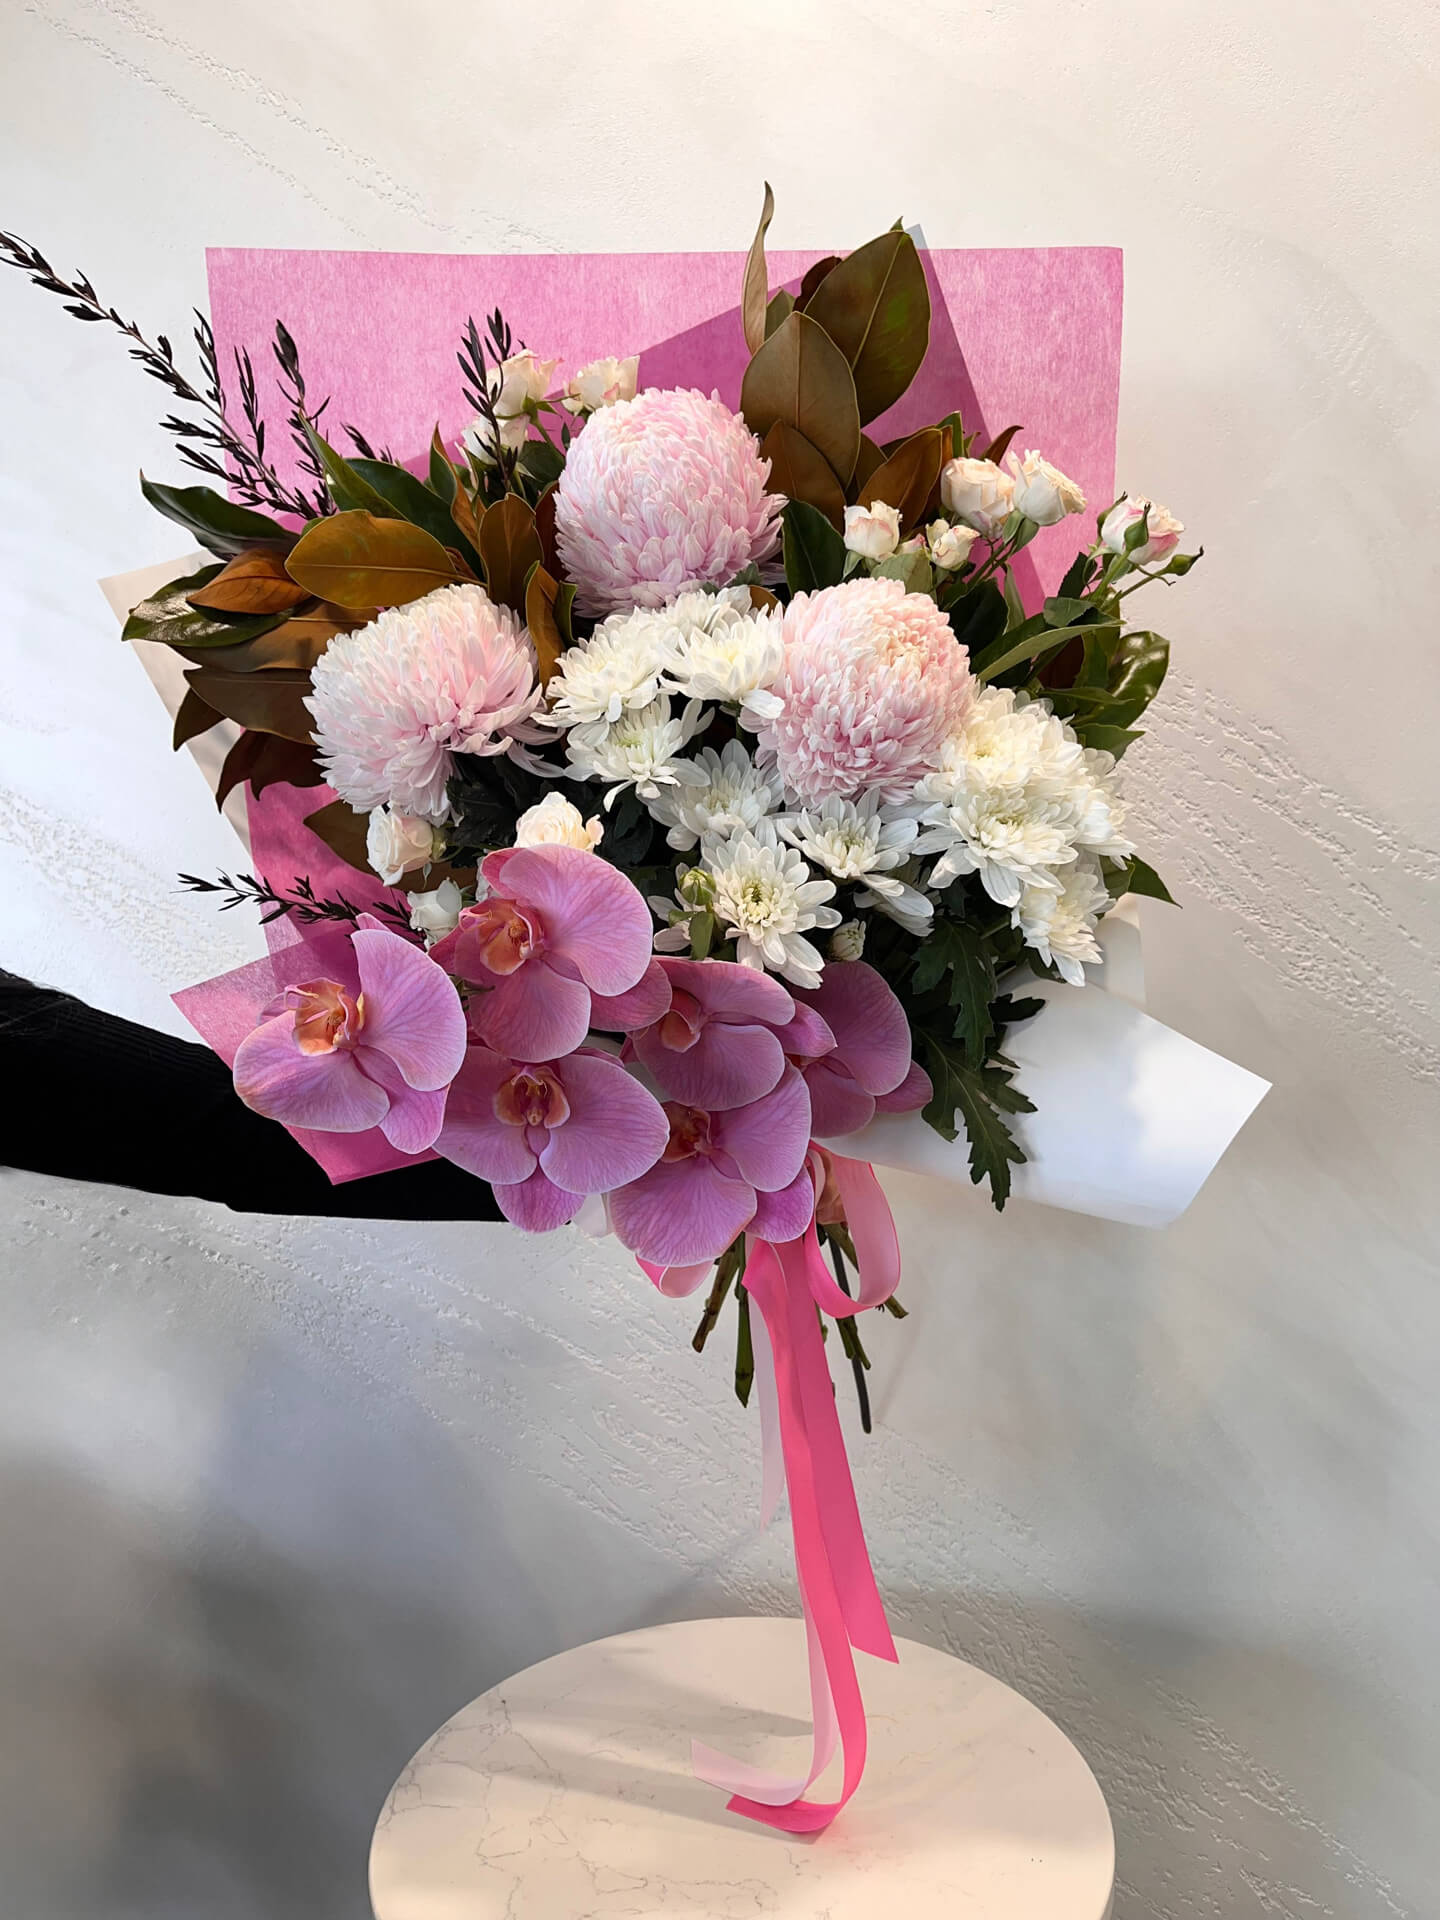 A beautiful foward facing bouquet featuring a phalaenopsis orchid with pink mums, spray roses and white daisies with lush foliage presented in a wrap and finished with ribbons.